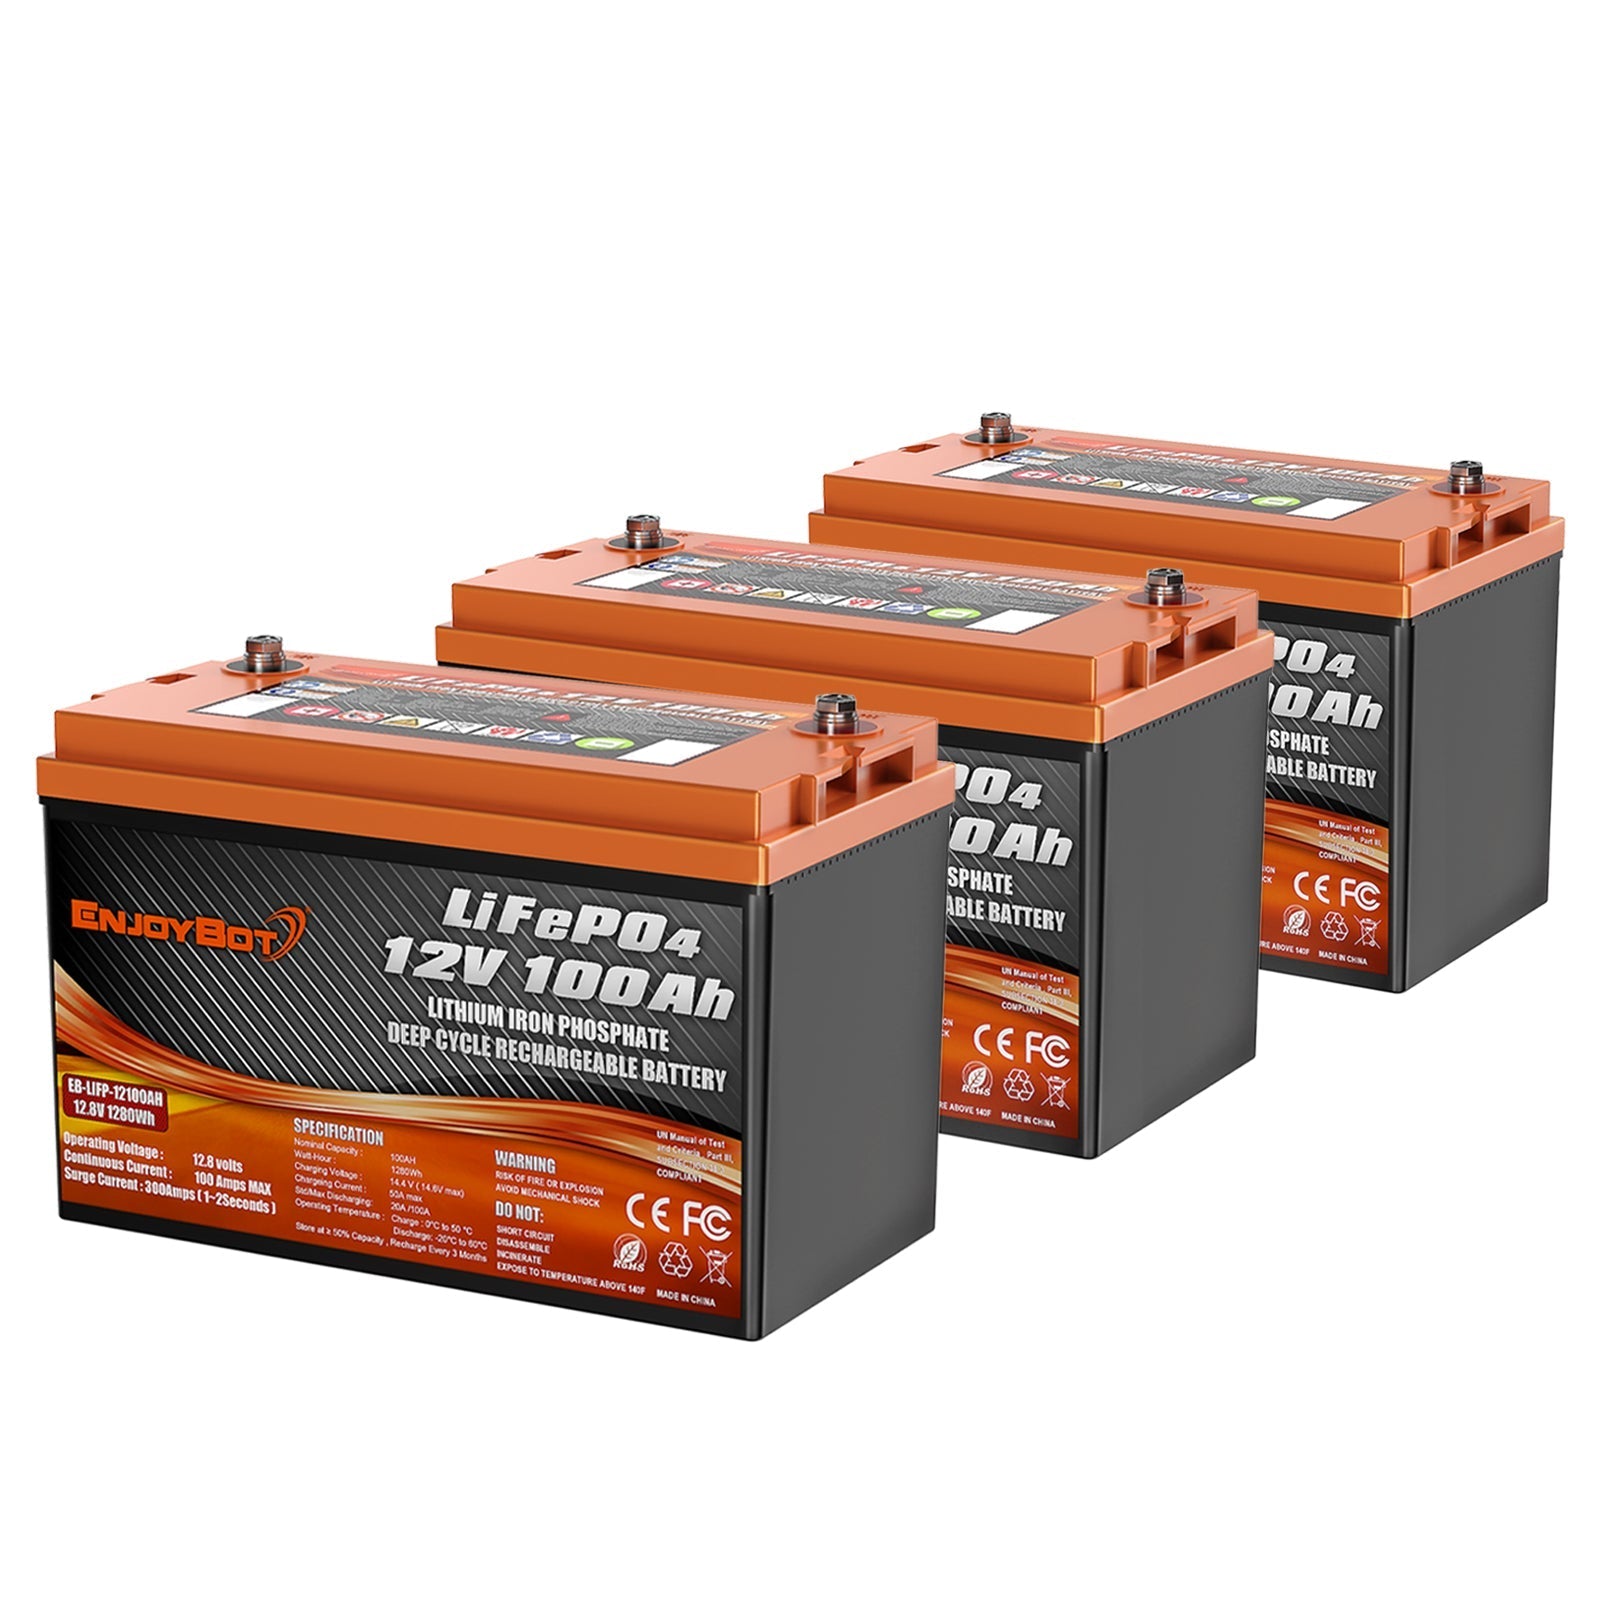 Batterie Lithium AG Automobile 100Ah 100A 12.8V LiFePO4 Energie : 1280 Wh